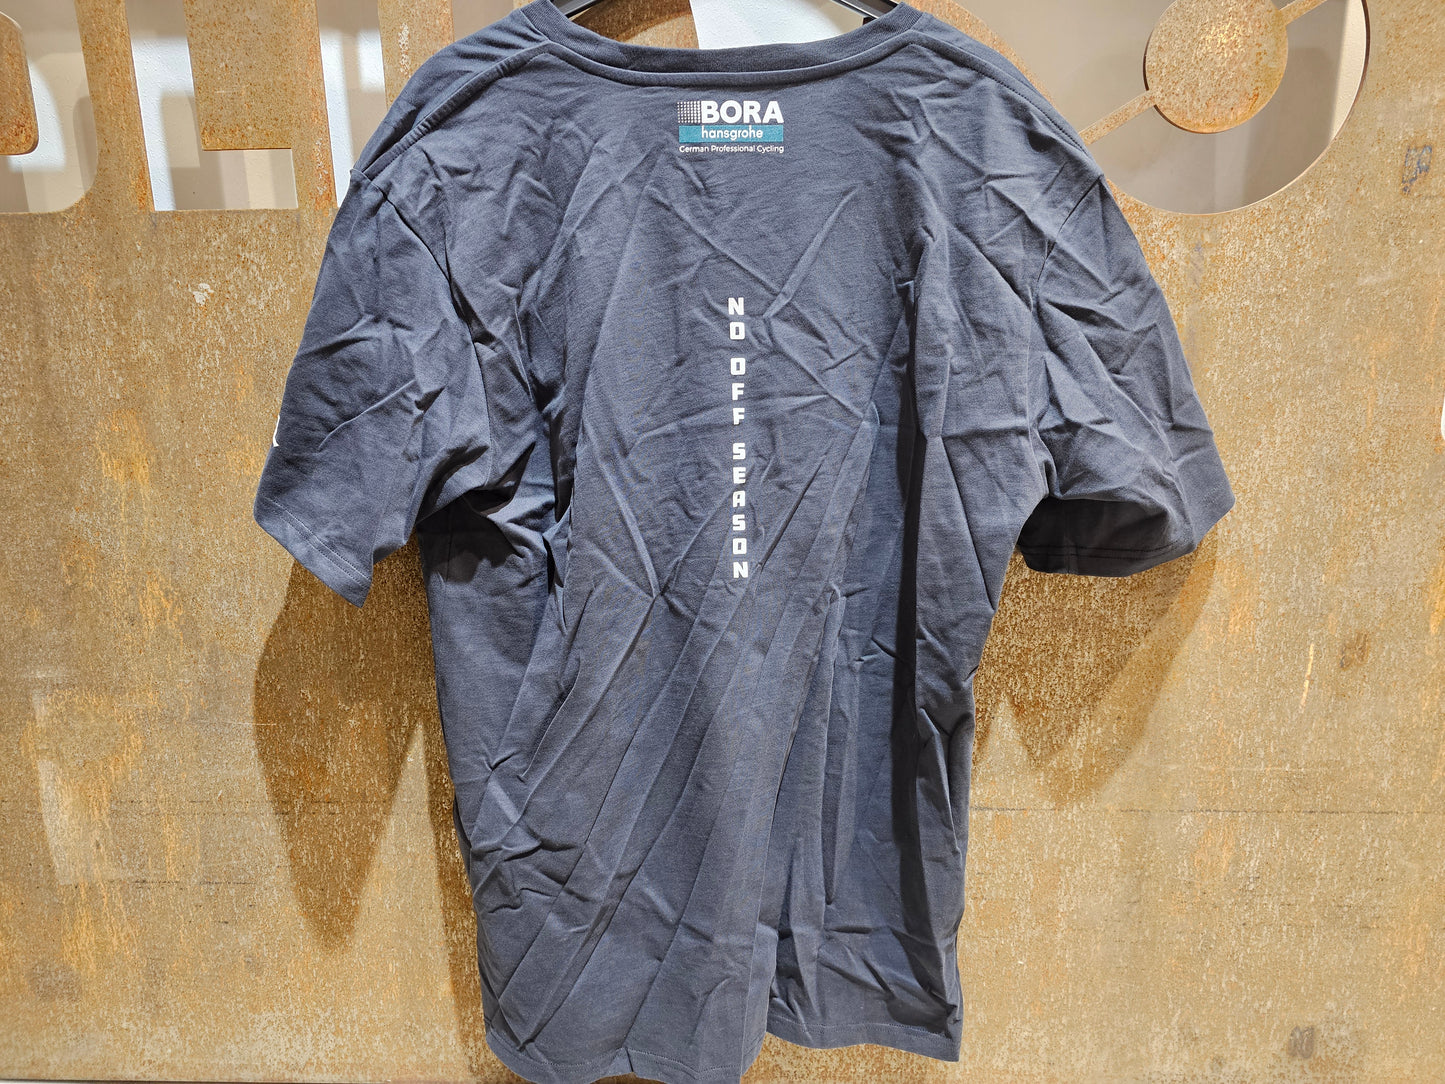 LE COL BORA HANSGROHE T-SHIRT BAND OF BROTHERS SCHWARZ